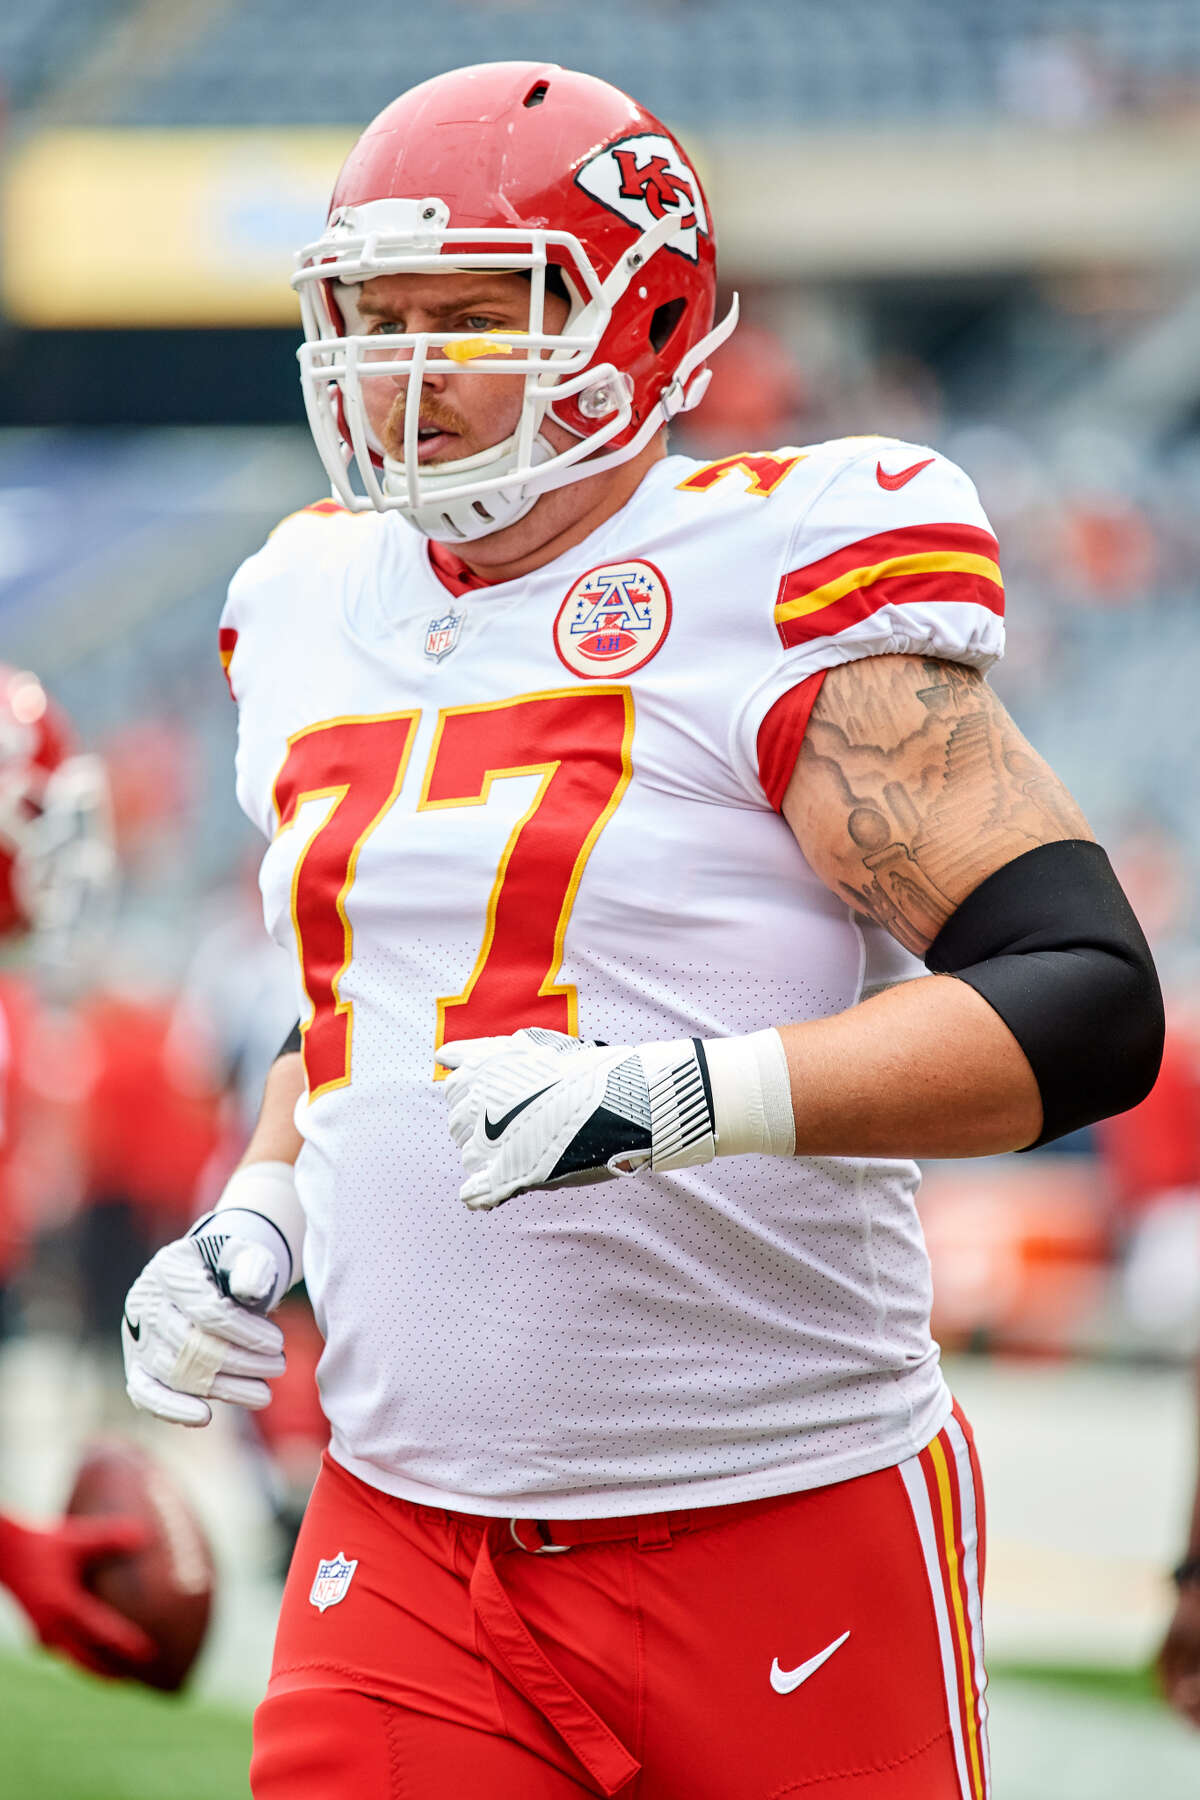 Kansas City Chiefs' offensive lineman Andrew Wylie warms up before a preseason game against the Chicago Bears at Soldier Field in Chicago, Ill., on Aug. 25, 2018.